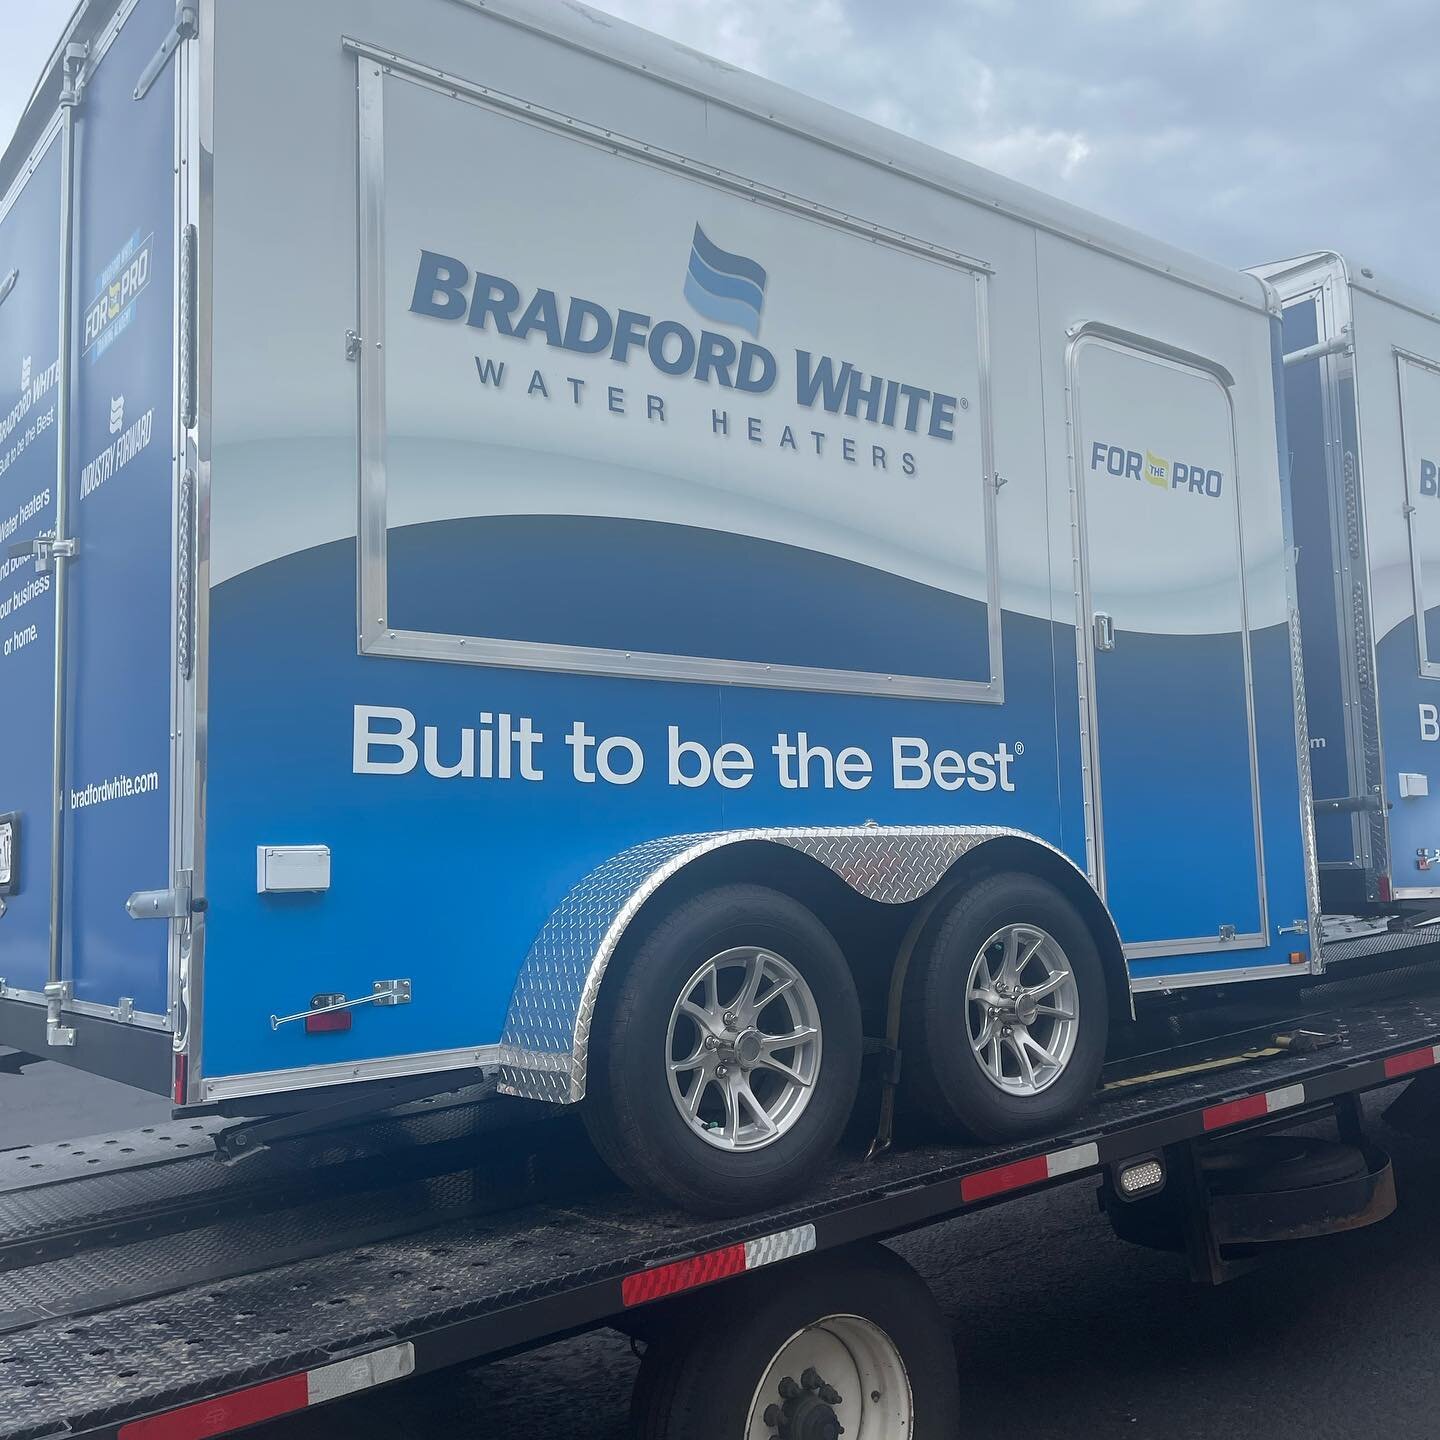 Excited to receive our new #bradfordwhite trailer today.  We look forward to hitting the road soon.